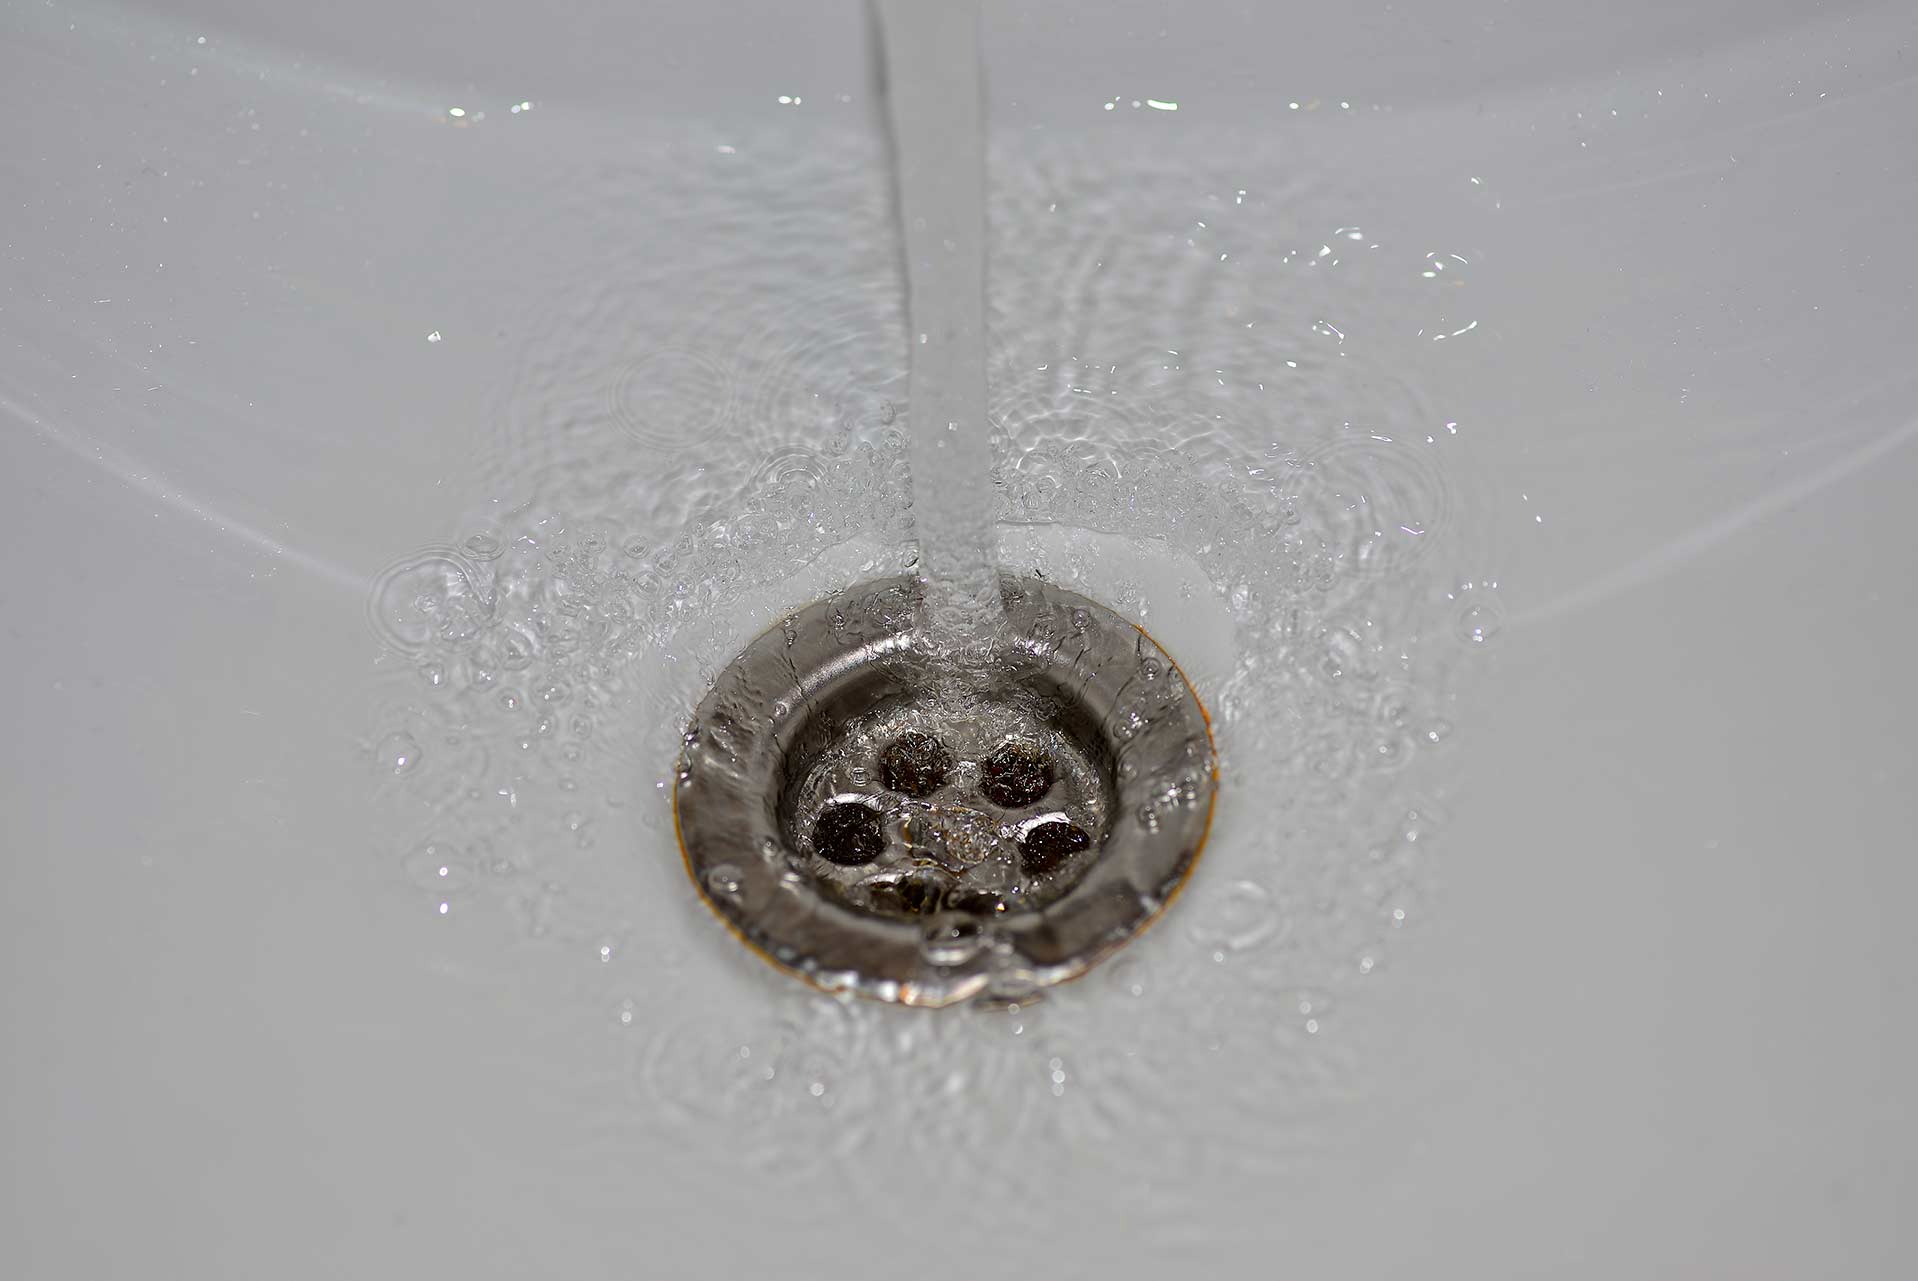 A2B Drains provides services to unblock blocked sinks and drains for properties in Cowdenbeath.